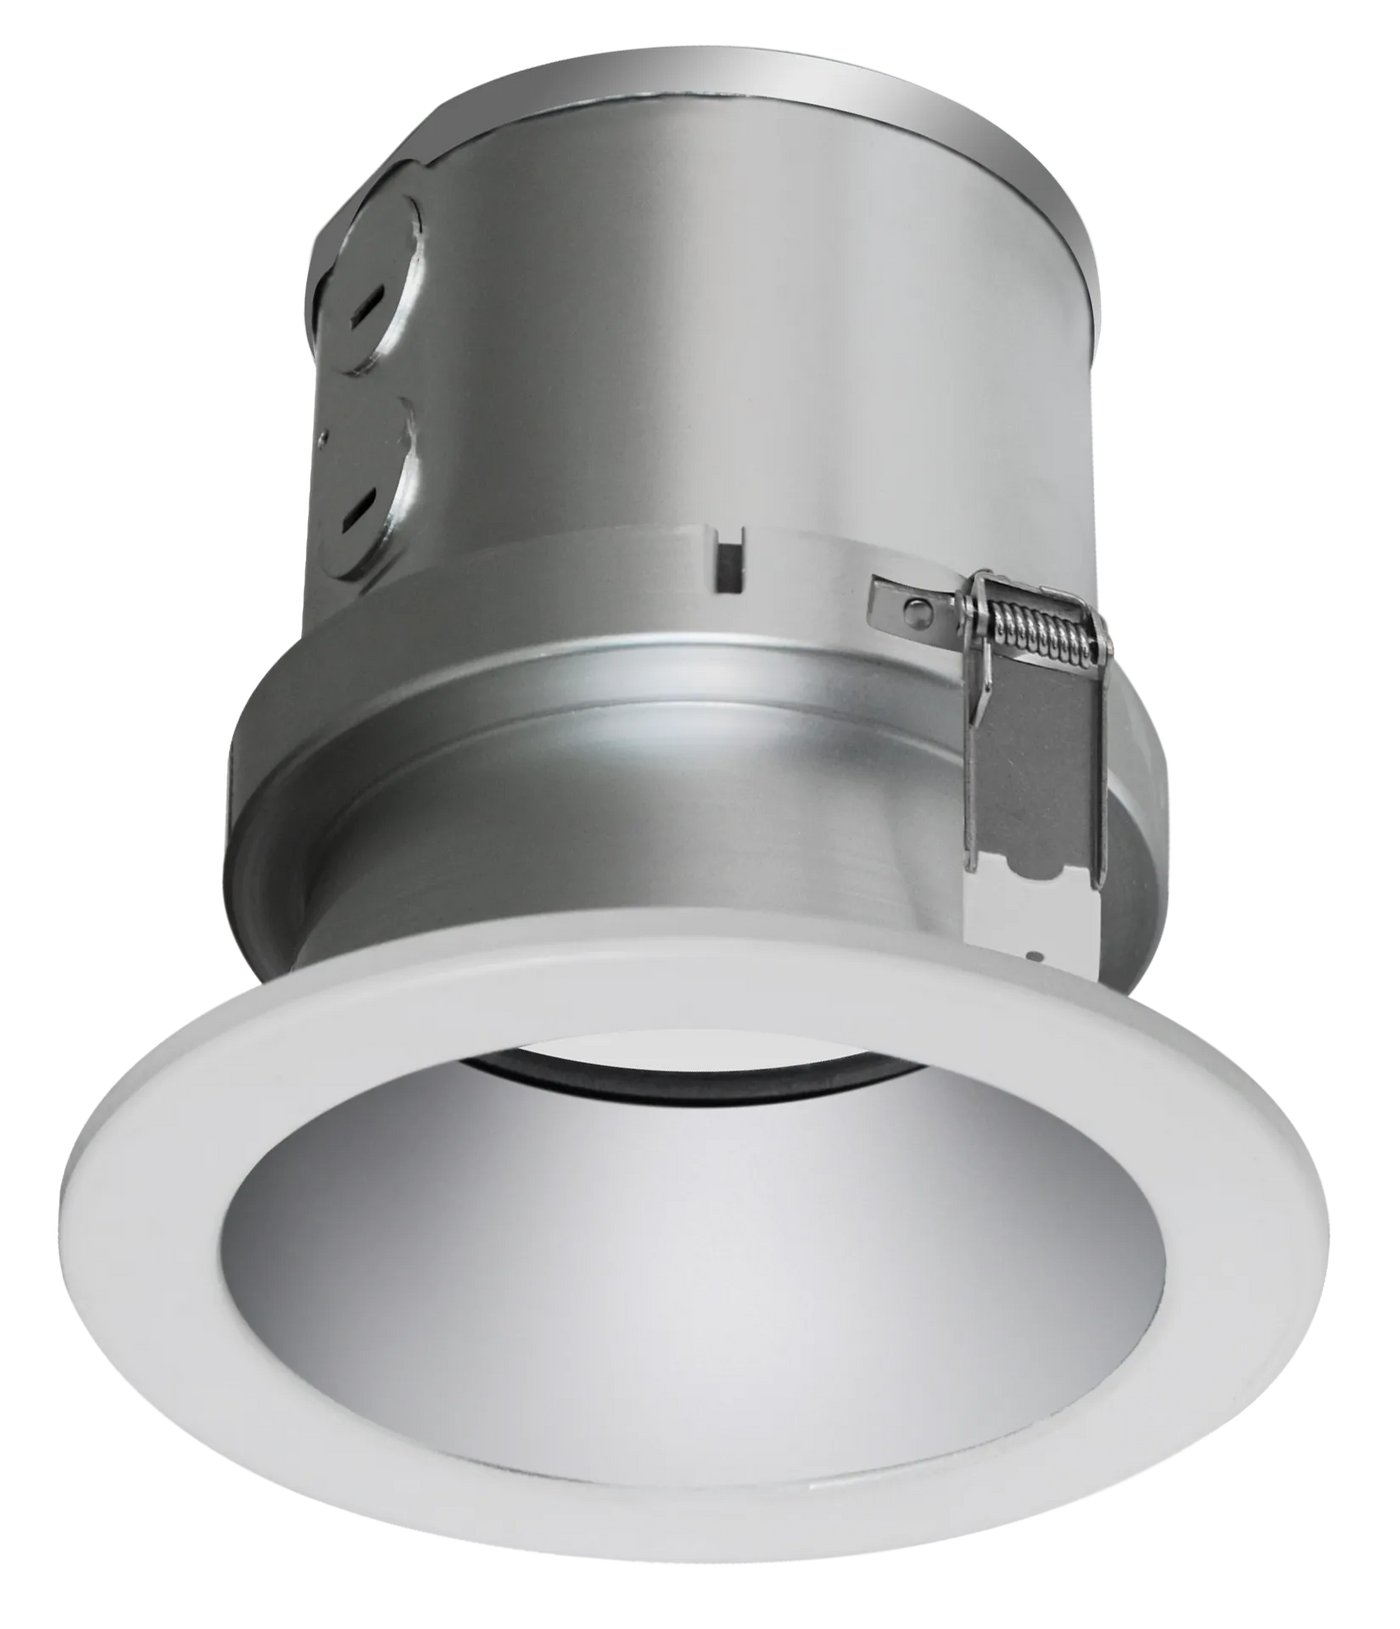 4" LED ROUND COMMERCIAL RECESSED LIGHT, 3200 LUMEN MAX, WATTAGE AND CCT SELECTABLE, 120-277V, HAZE OR WHITE